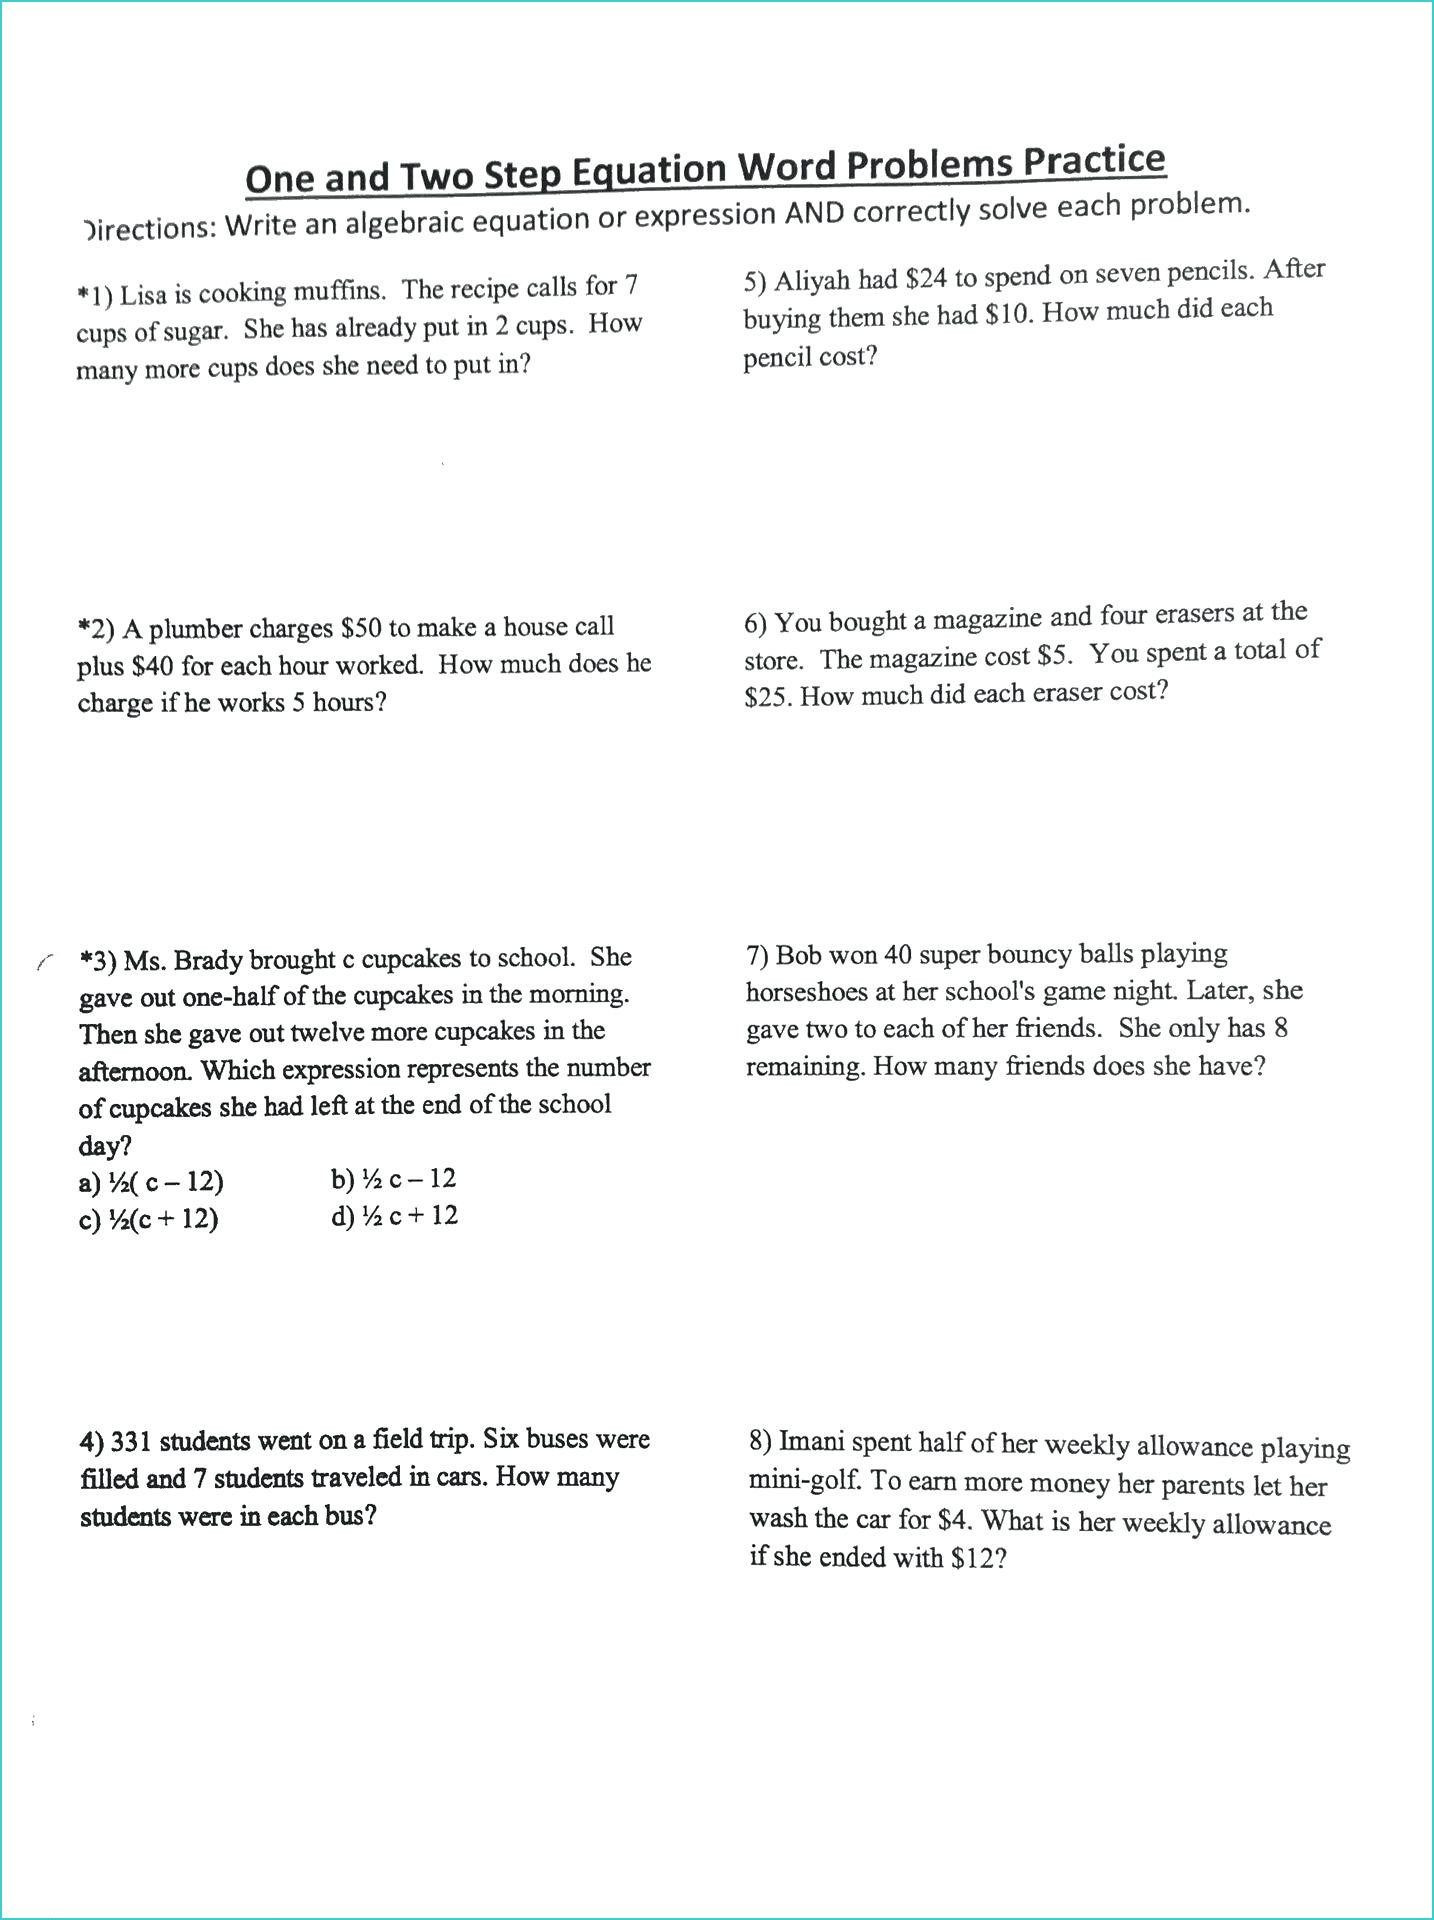 Writing Two Step Equations Worksheet Adding and Subtracting Integers Word Problems Worksheet